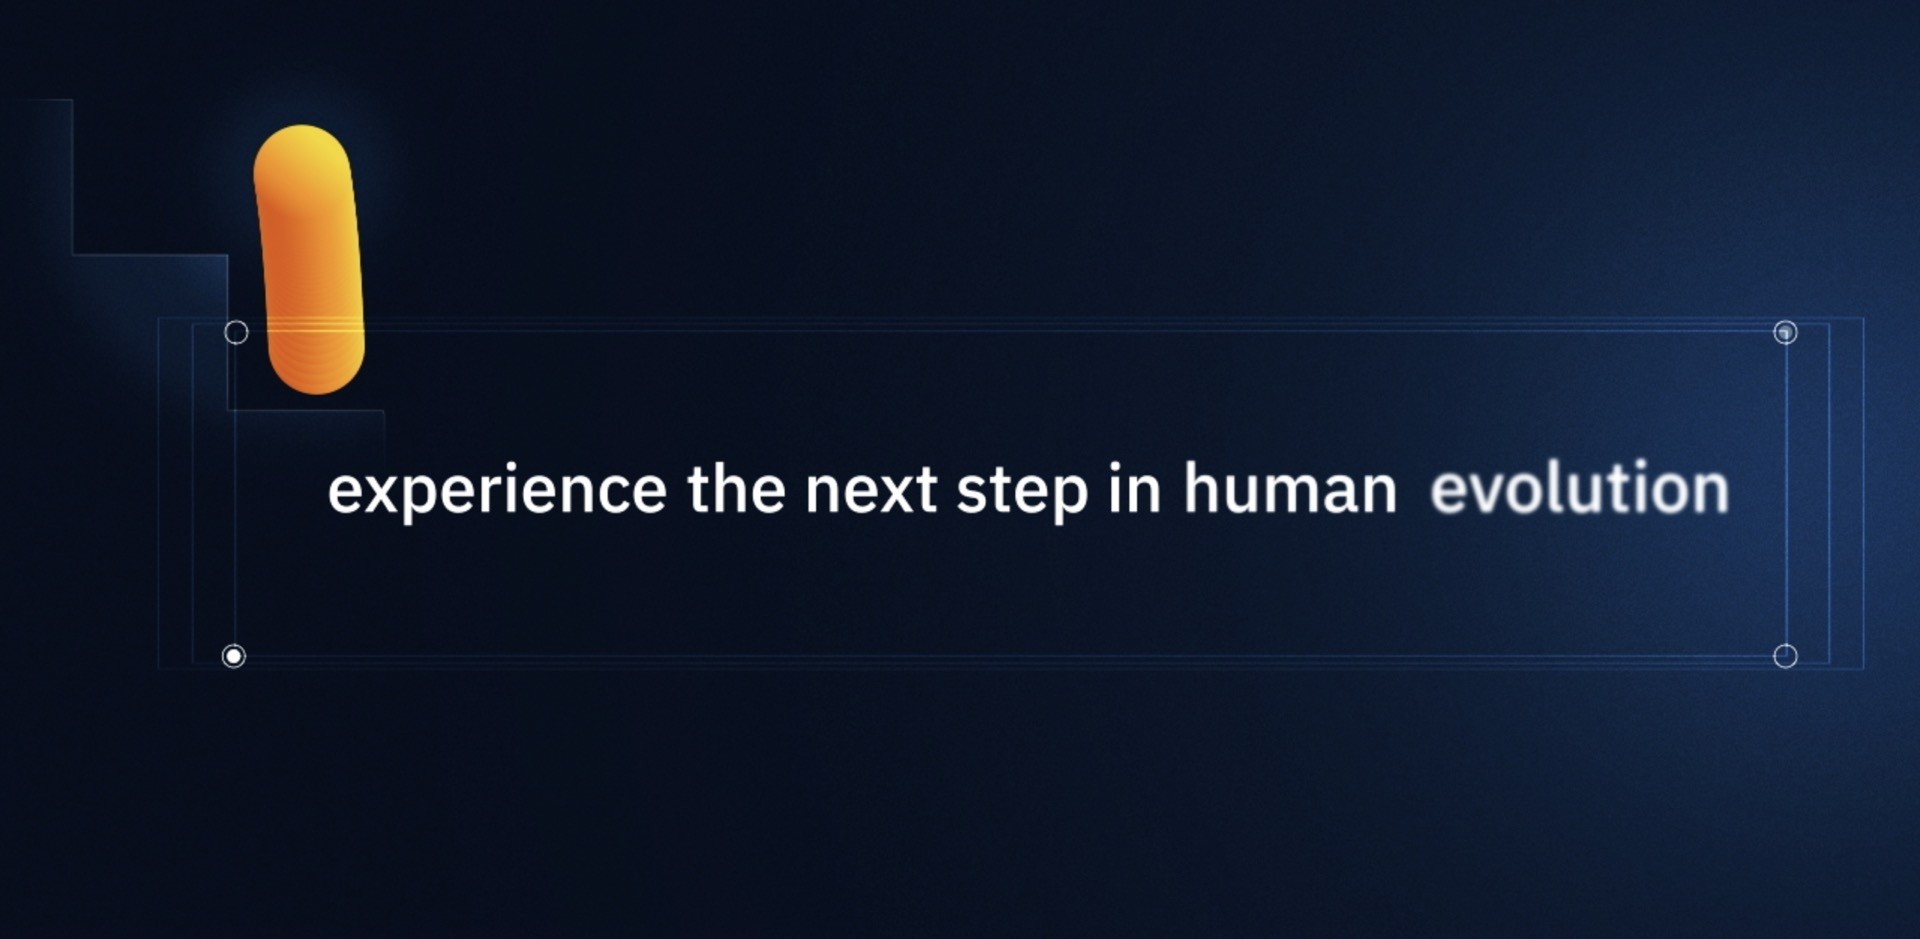 Experience the next step in human evolution